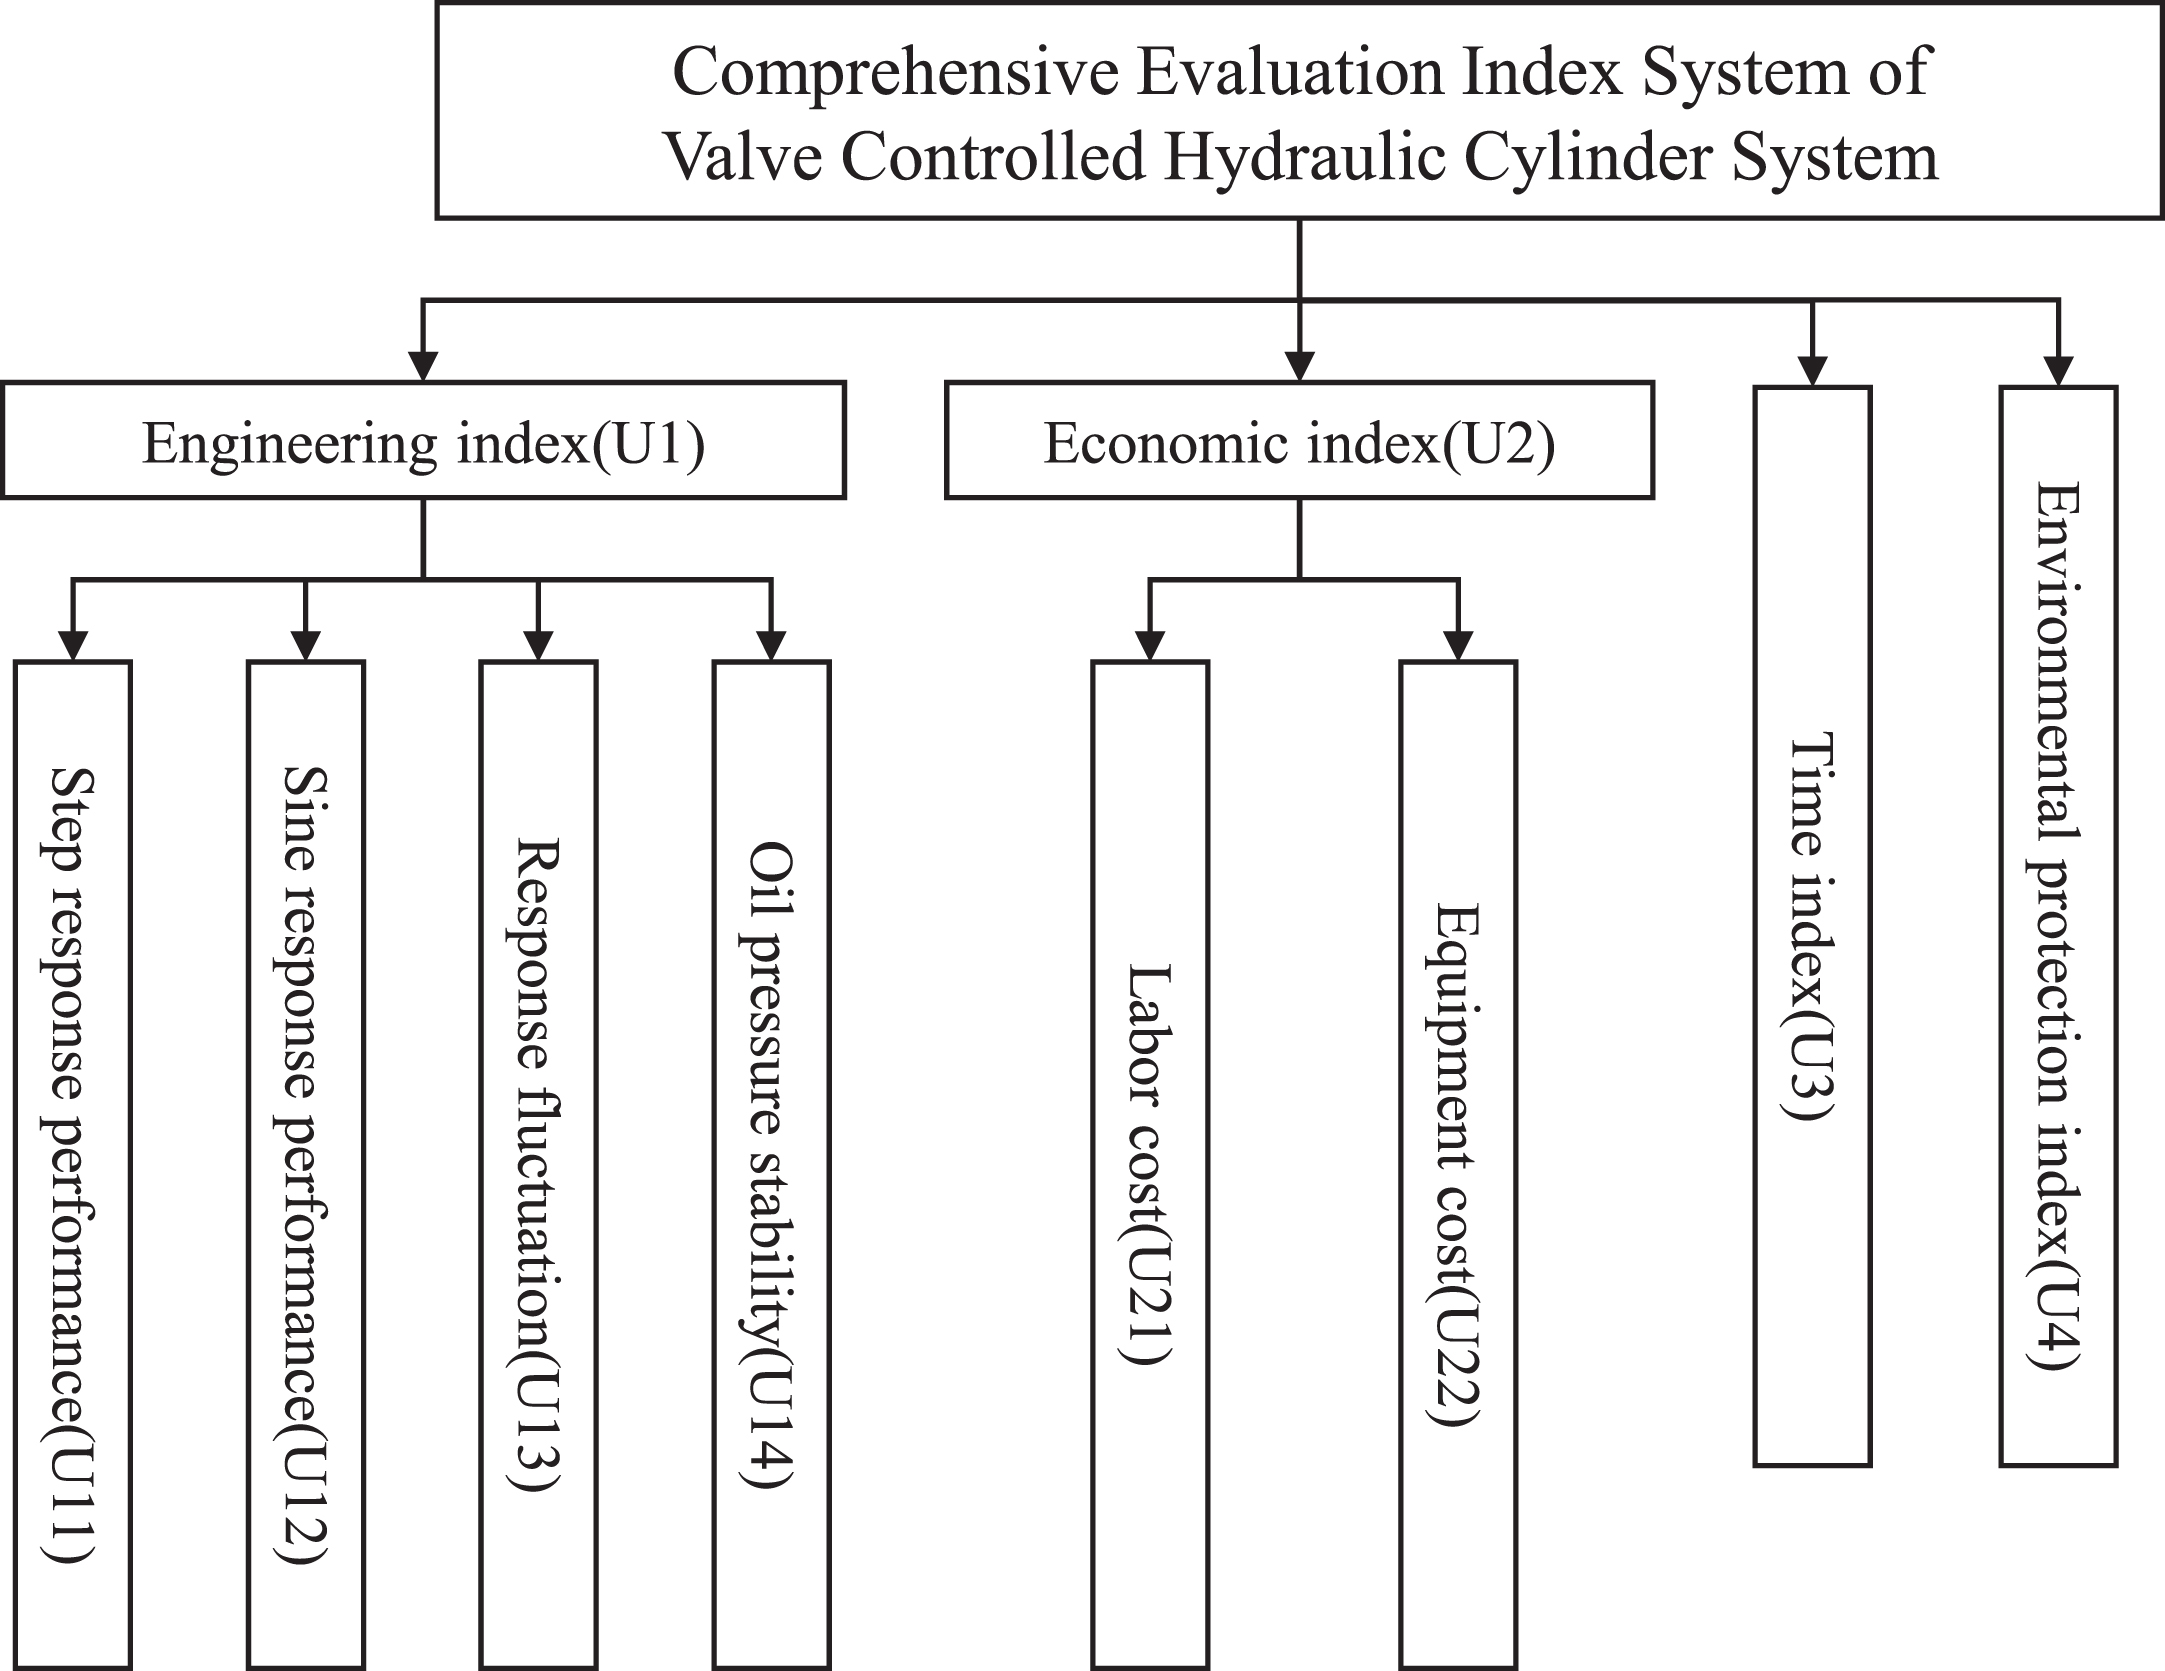 Comprehensive evaluation index system for the valve-controlled hydraulic cylinder system.